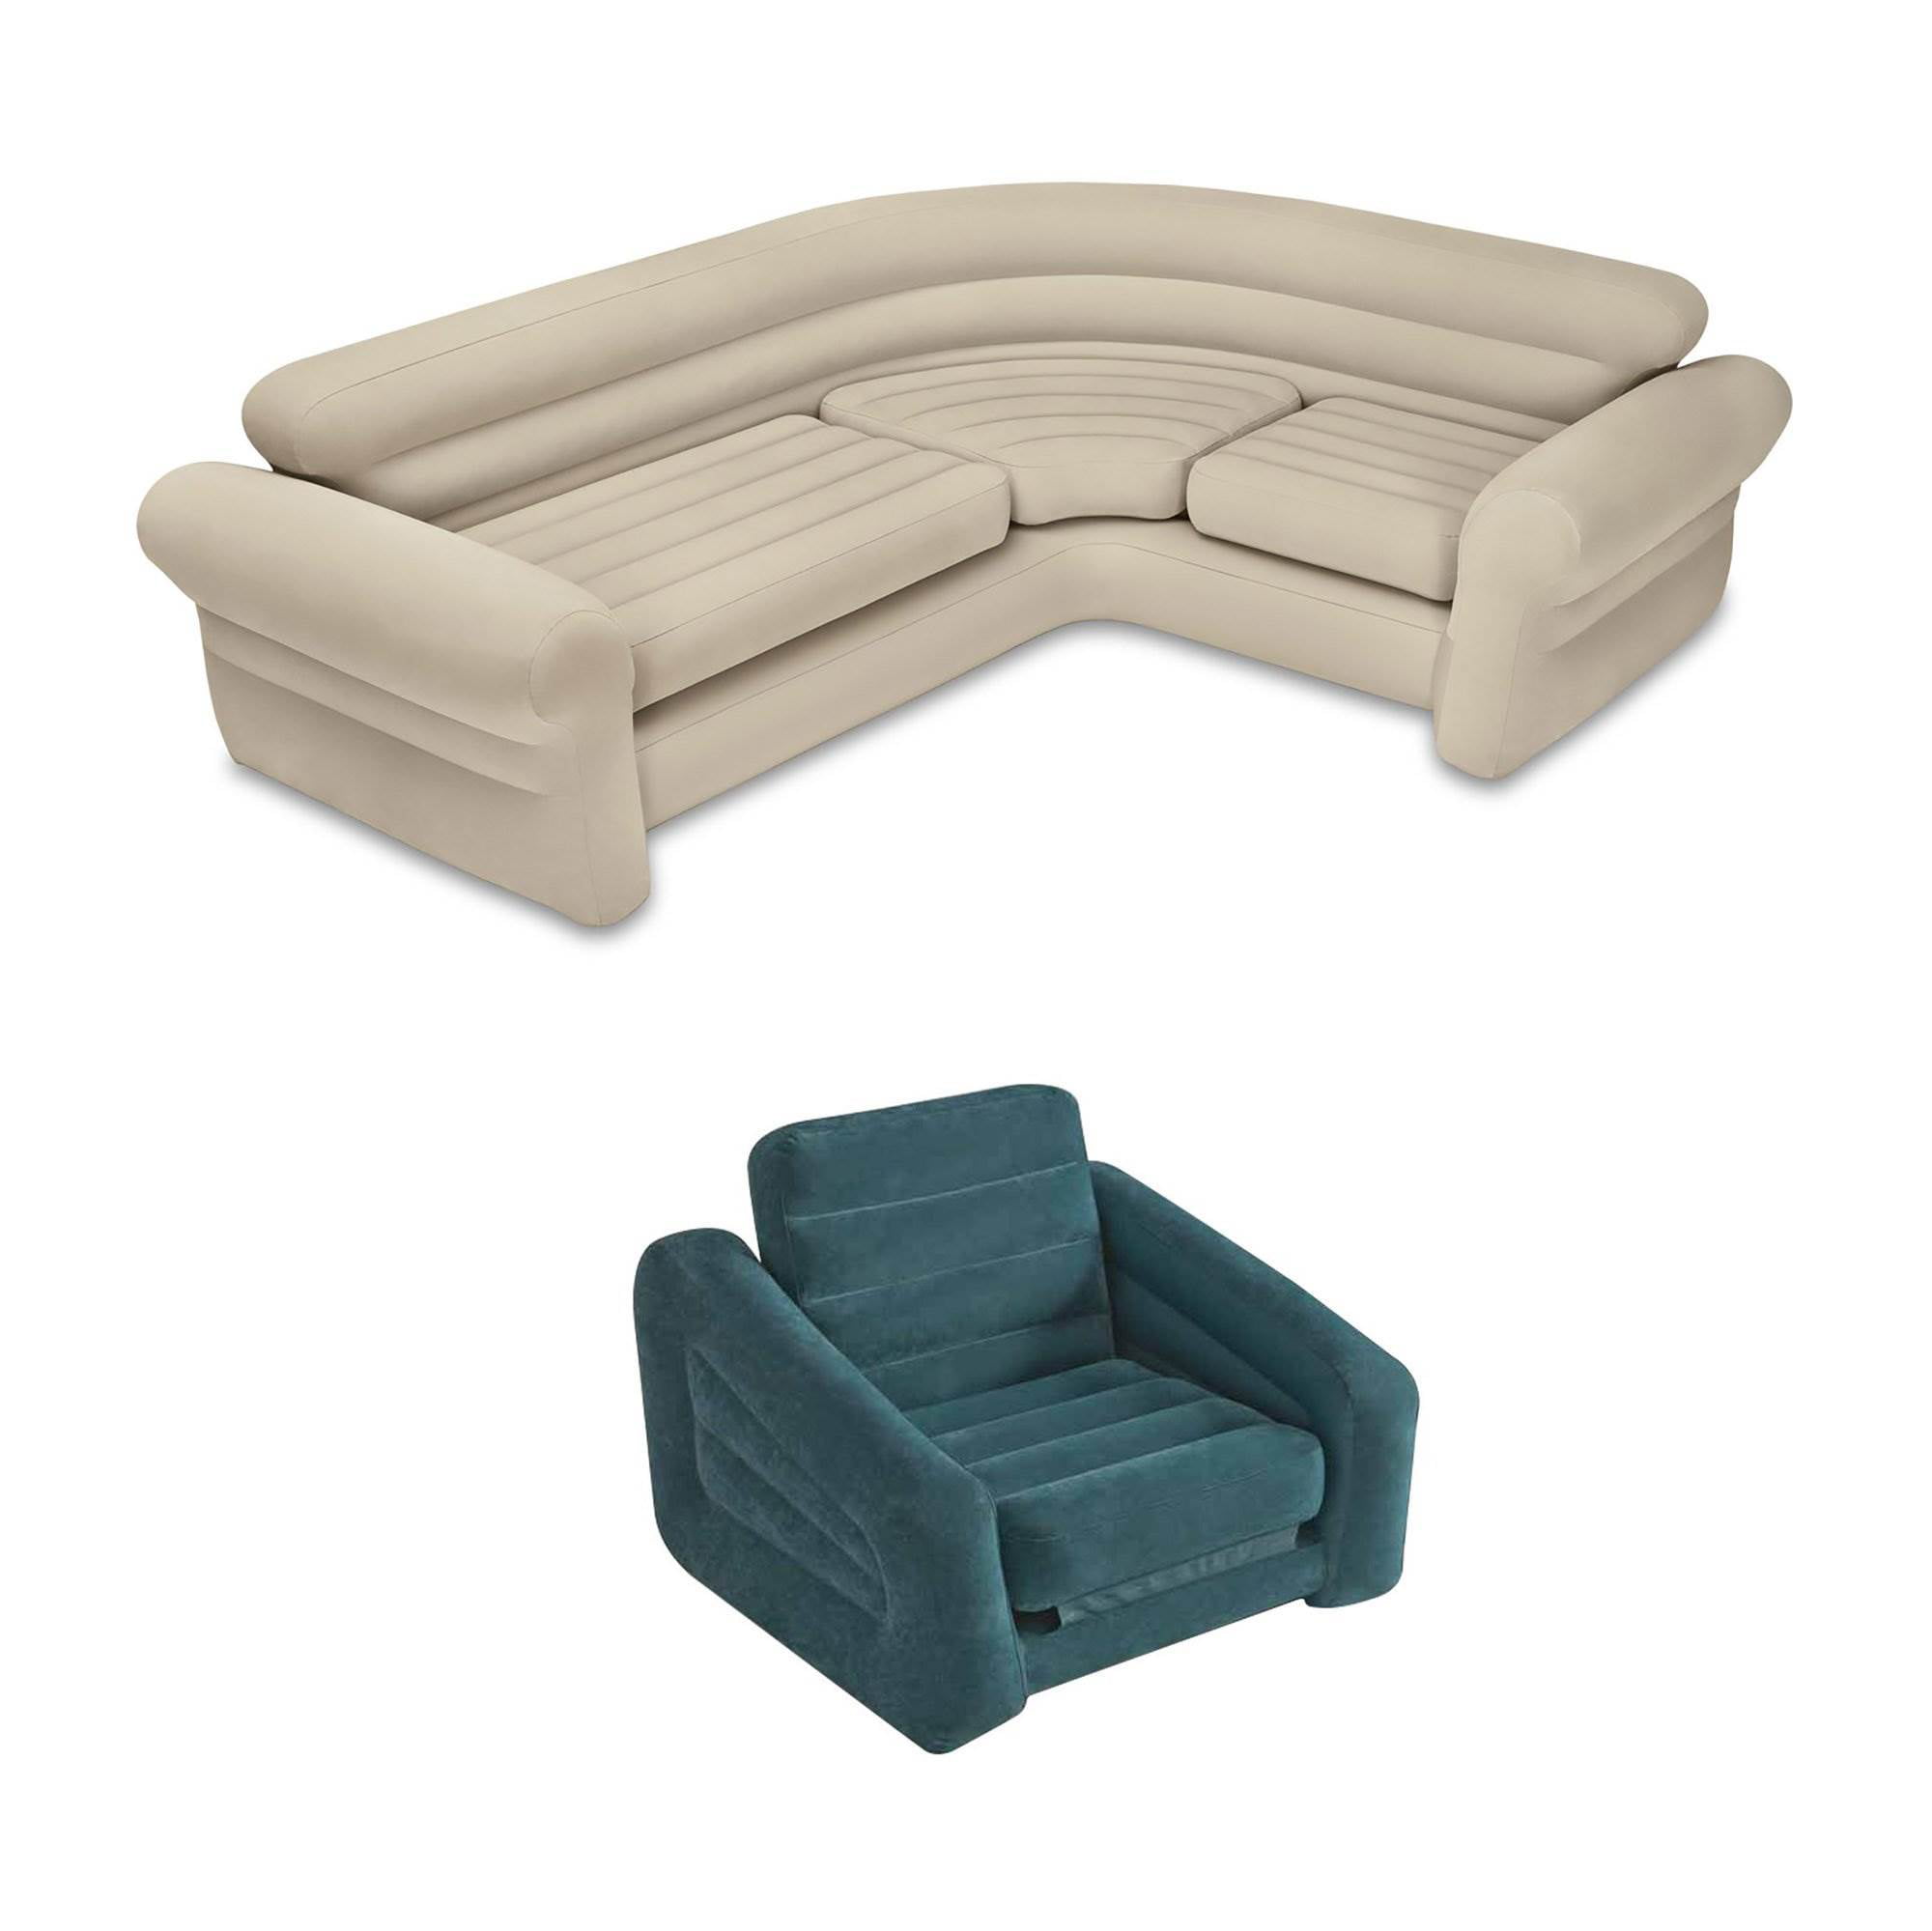 Simple Inflatable Chair Bed Walmart 